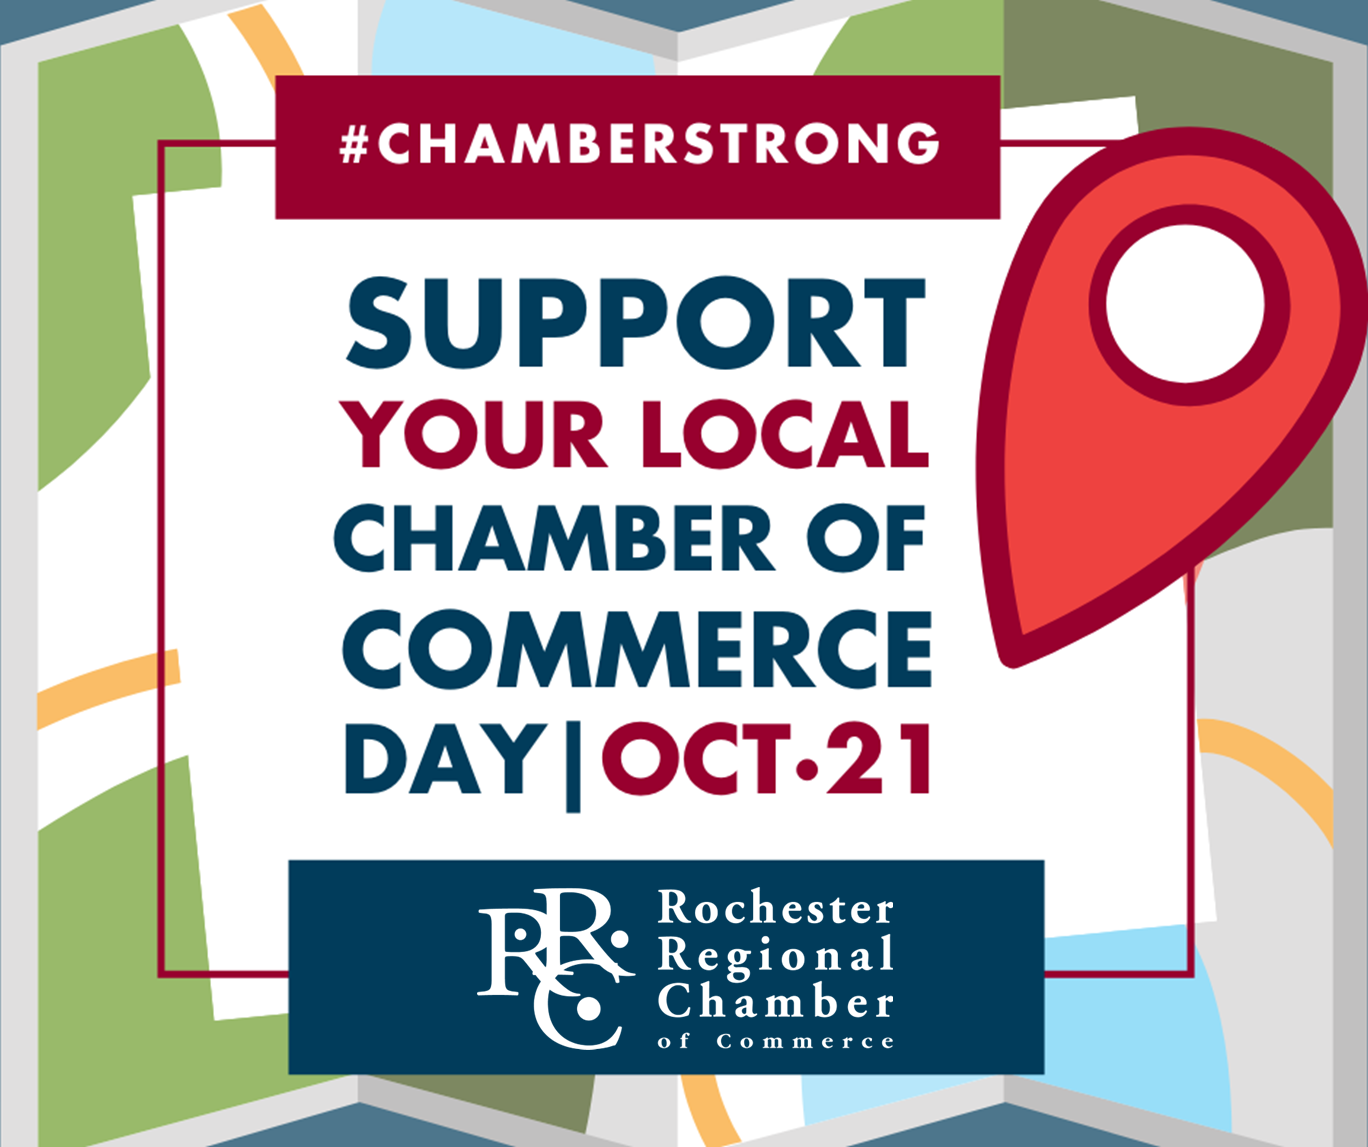 Image for National Chamber of Commerce Day - 10/21